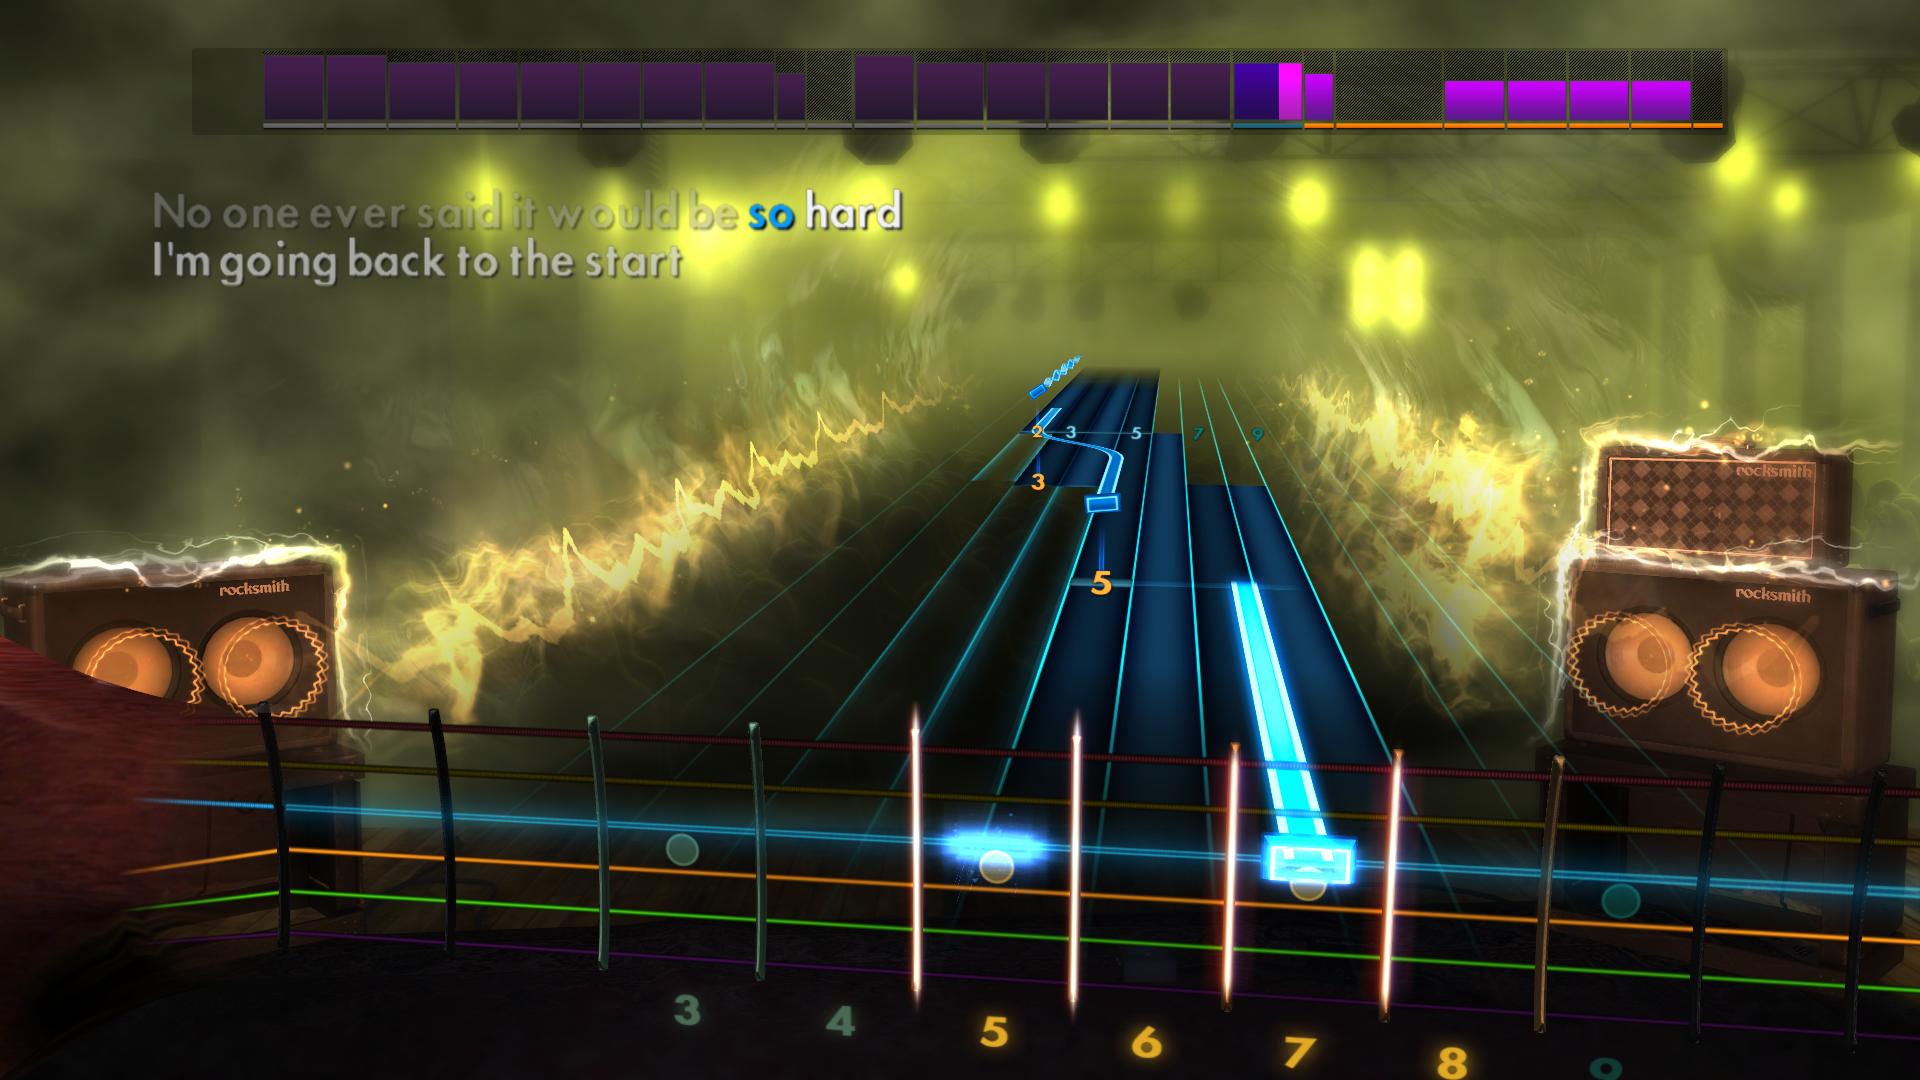 Rocksmith® 2014 Edition – Remastered – Coldplay - “The Scientist”